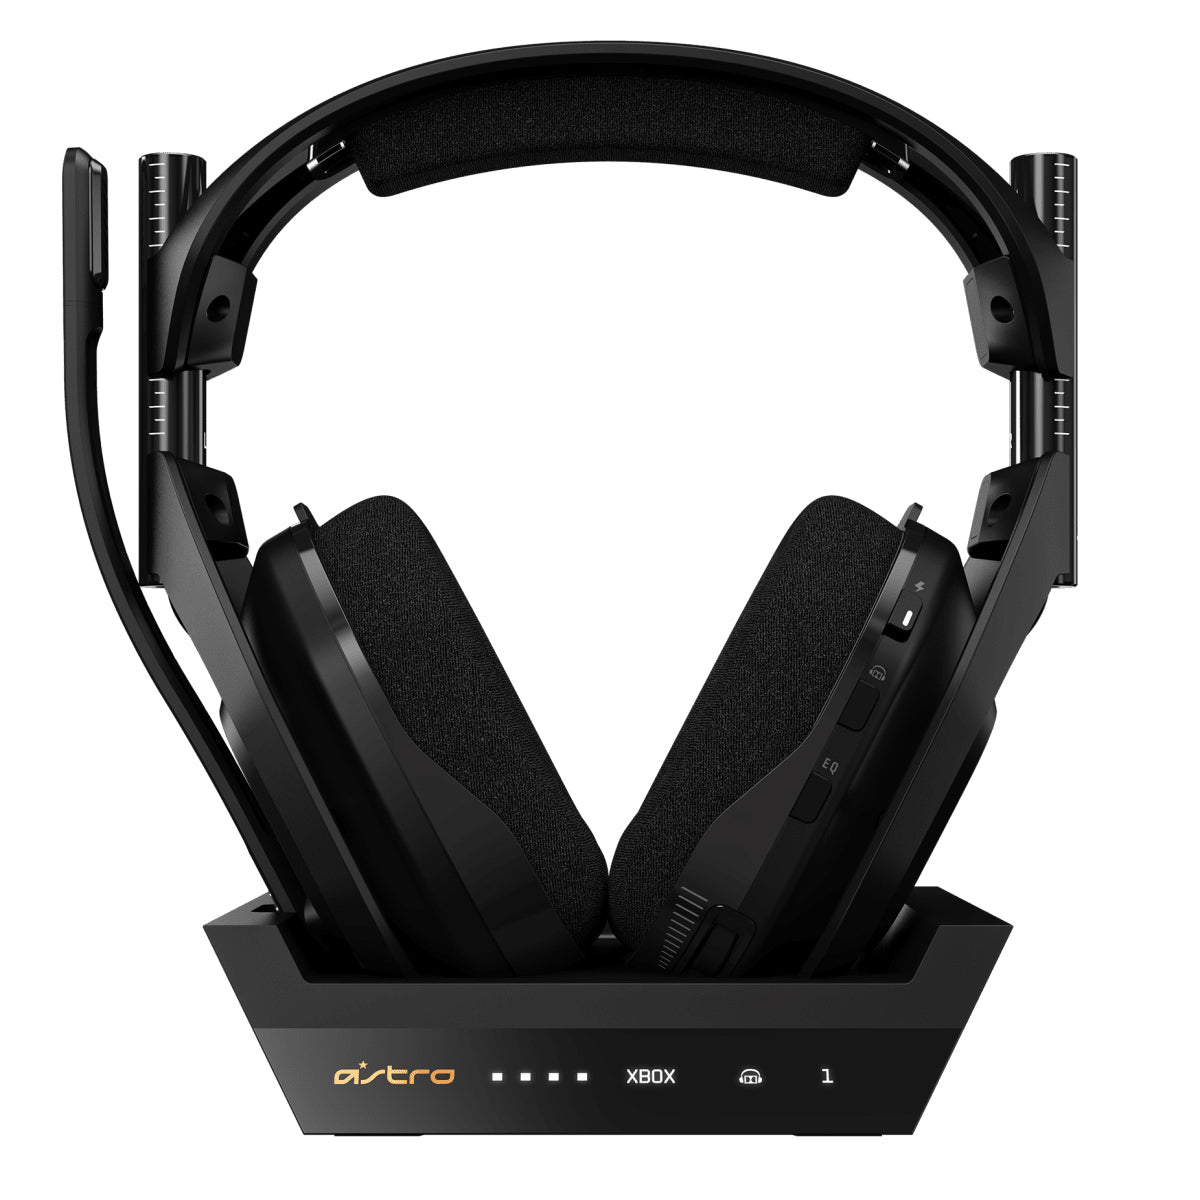 Astro A50 Wireless Dolby Gaming Headset for PC and Xbox - Black